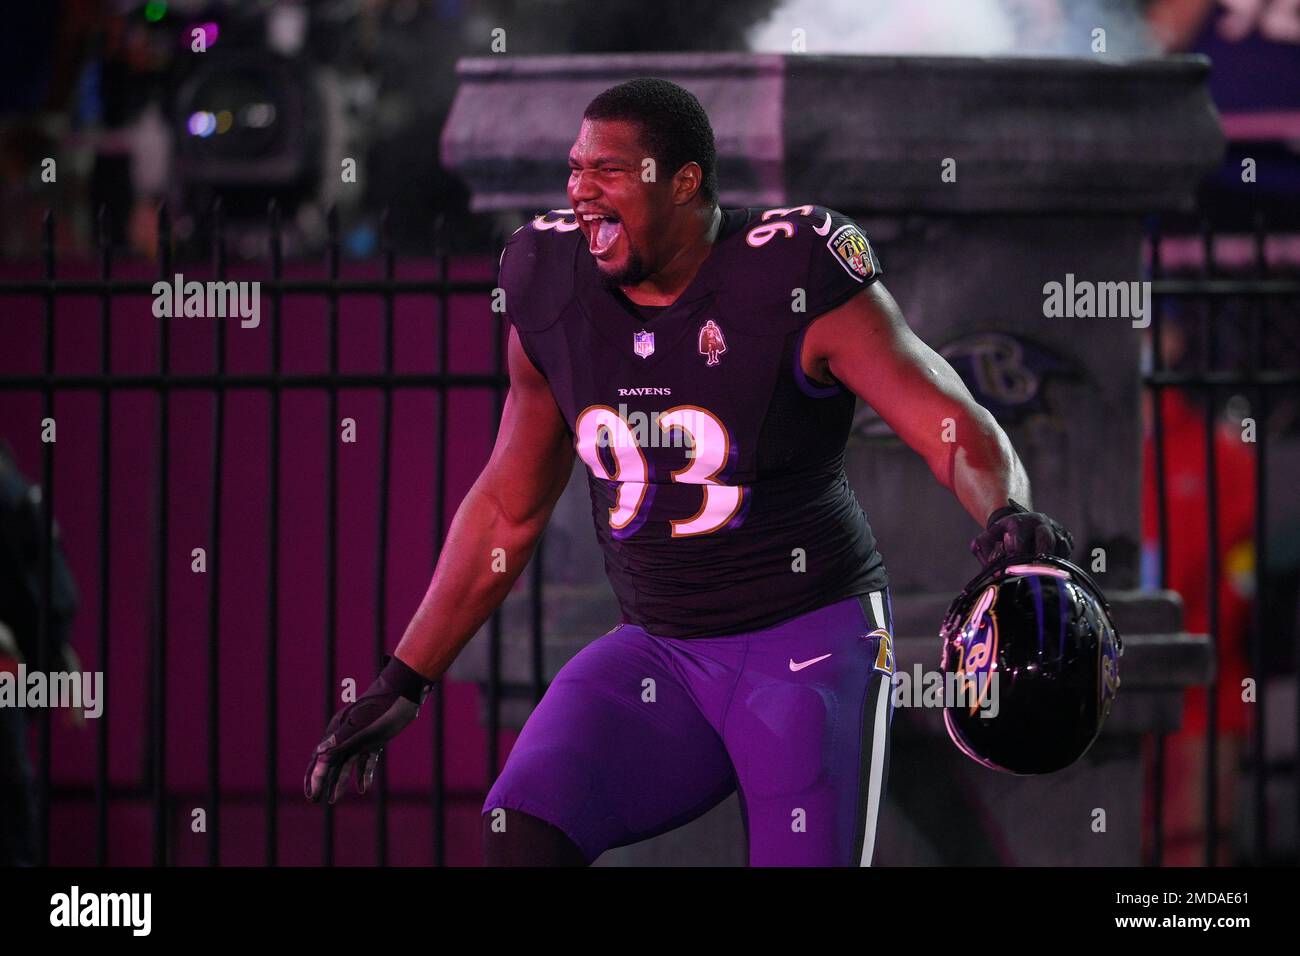 Baltimore Ravens defensive end Calais Campbell (93) takes to the